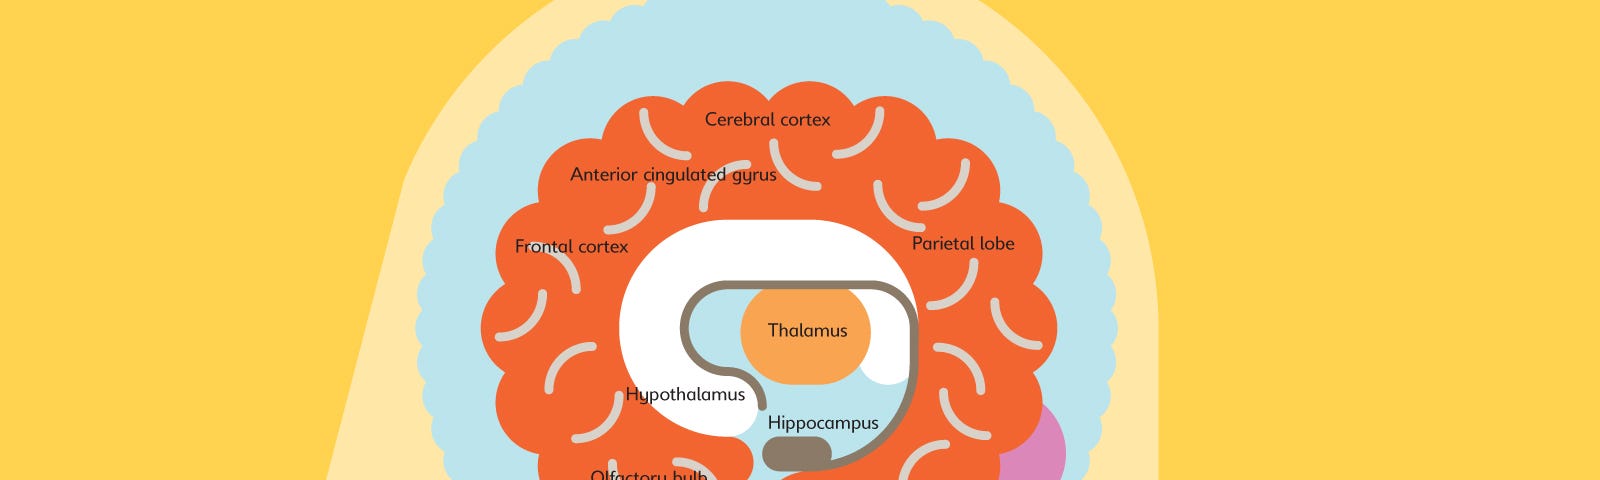 Infographic of the human brain by Peter Grundy